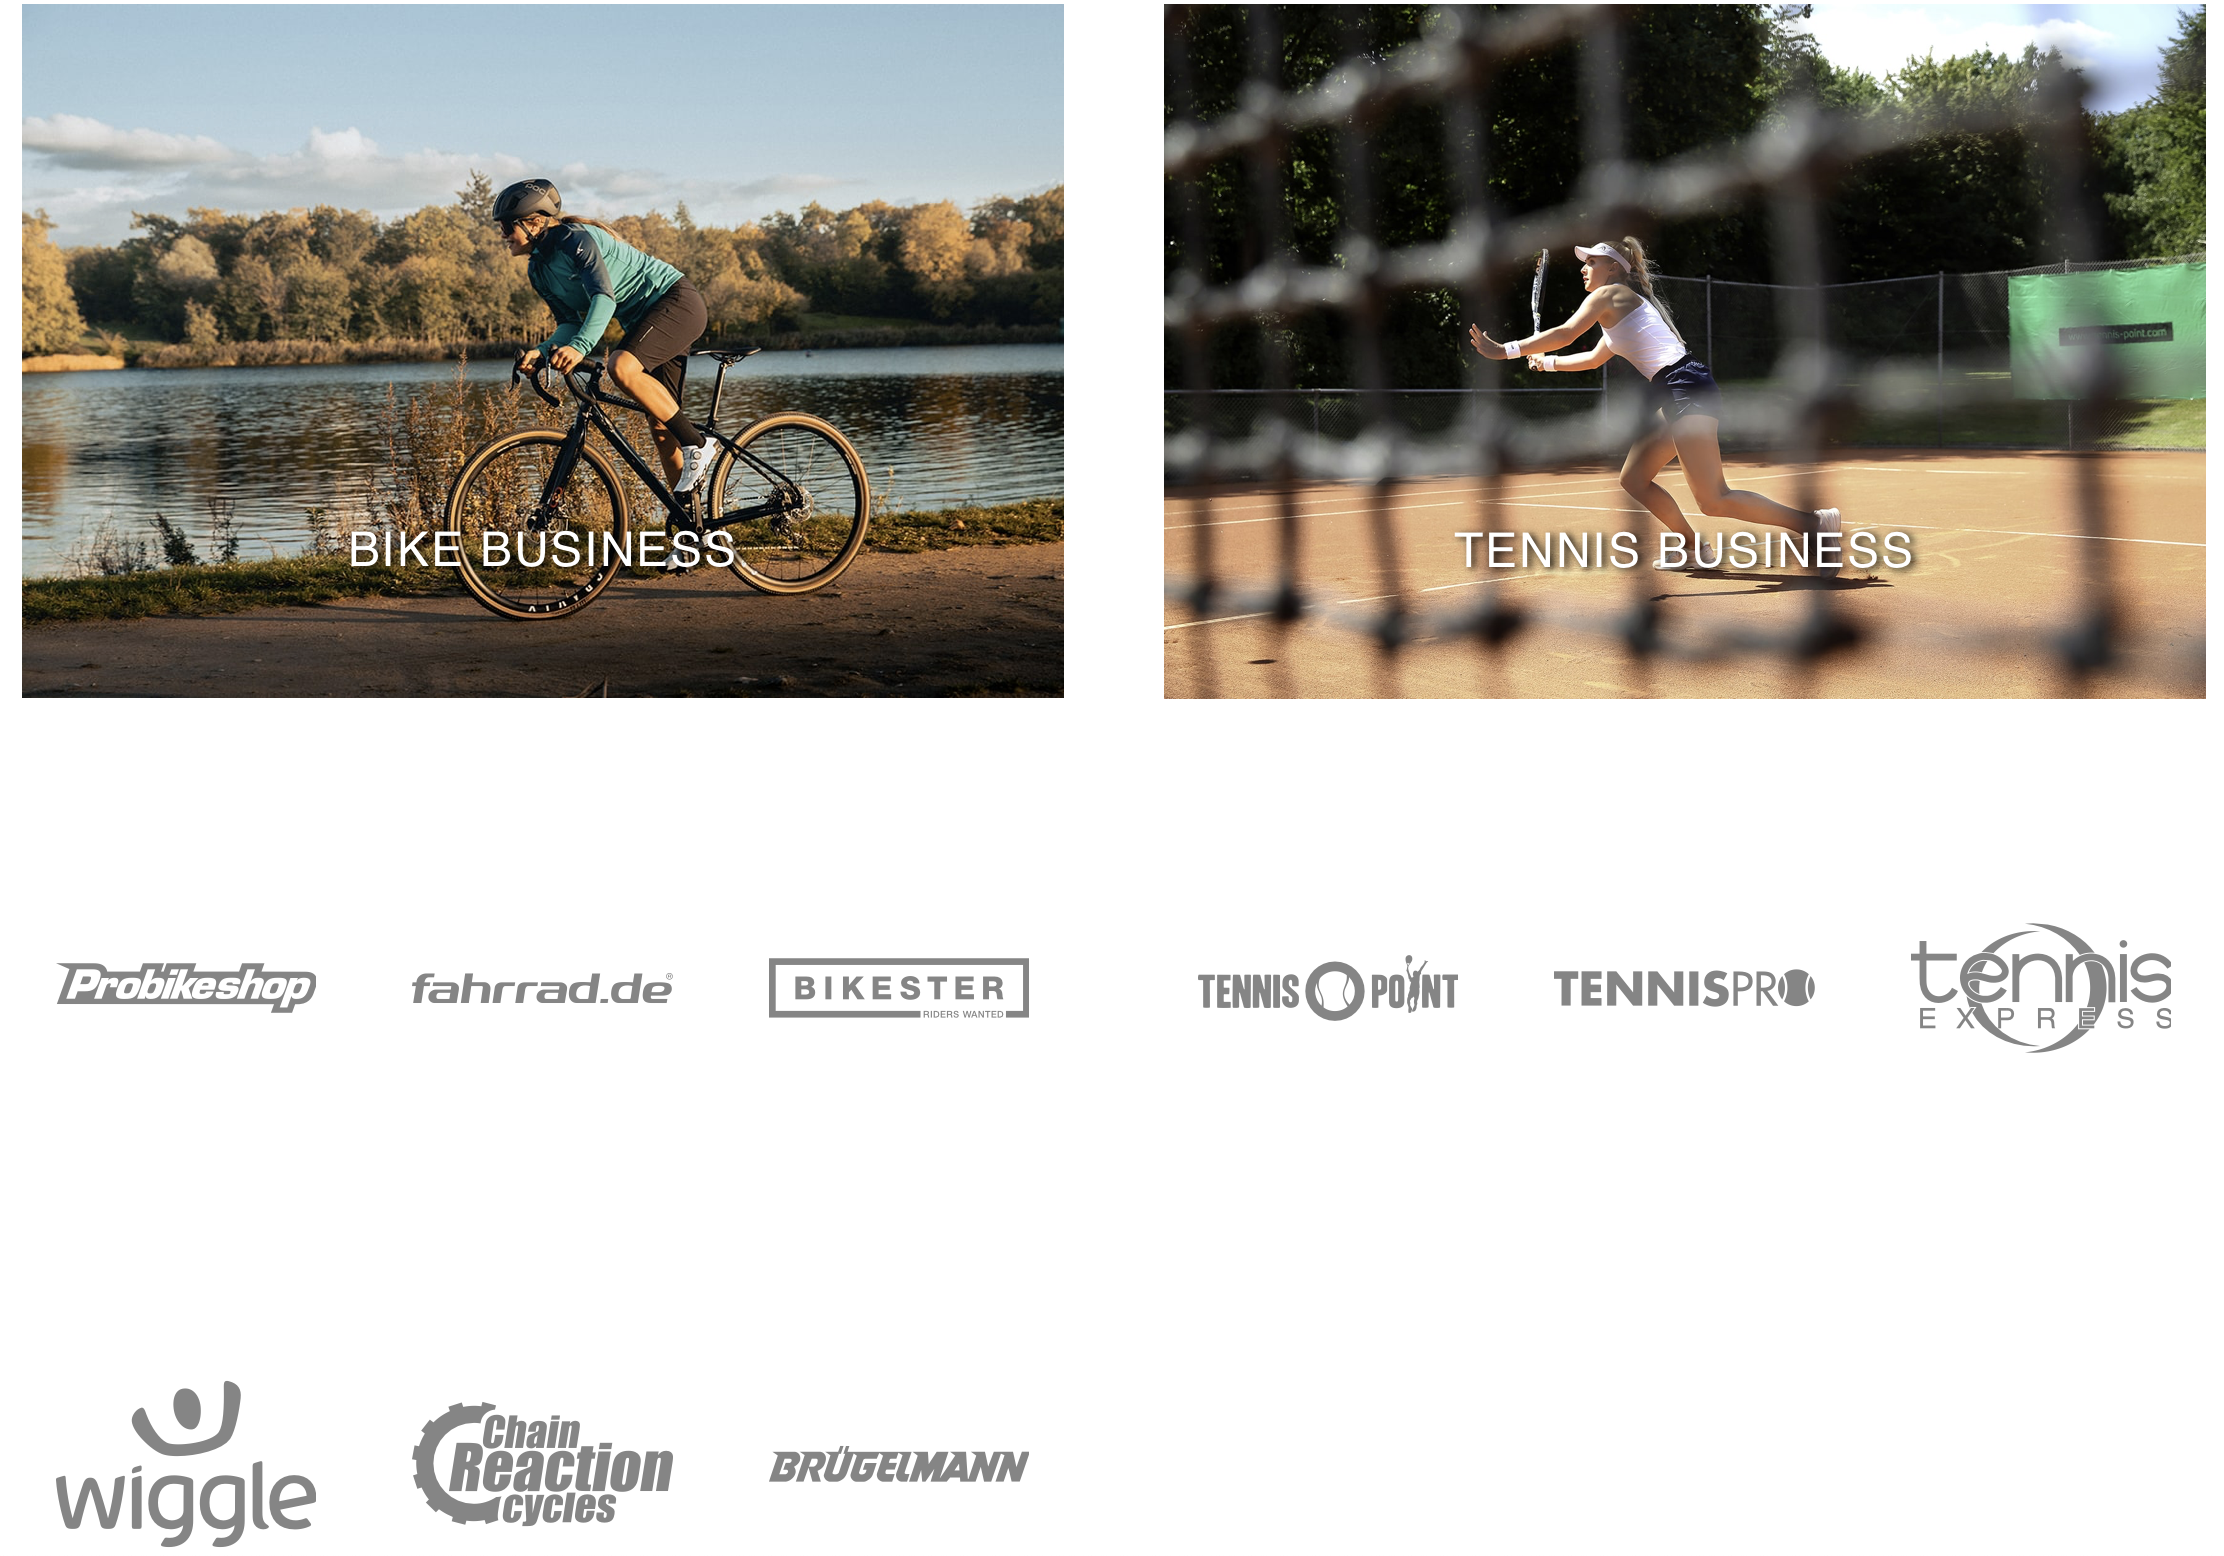 A screenshot from the Signa Sports United site showing its various retail brands, including Probikeshop, Fahrrad.de, Bikester, Wiggle, and Chain Reaction.